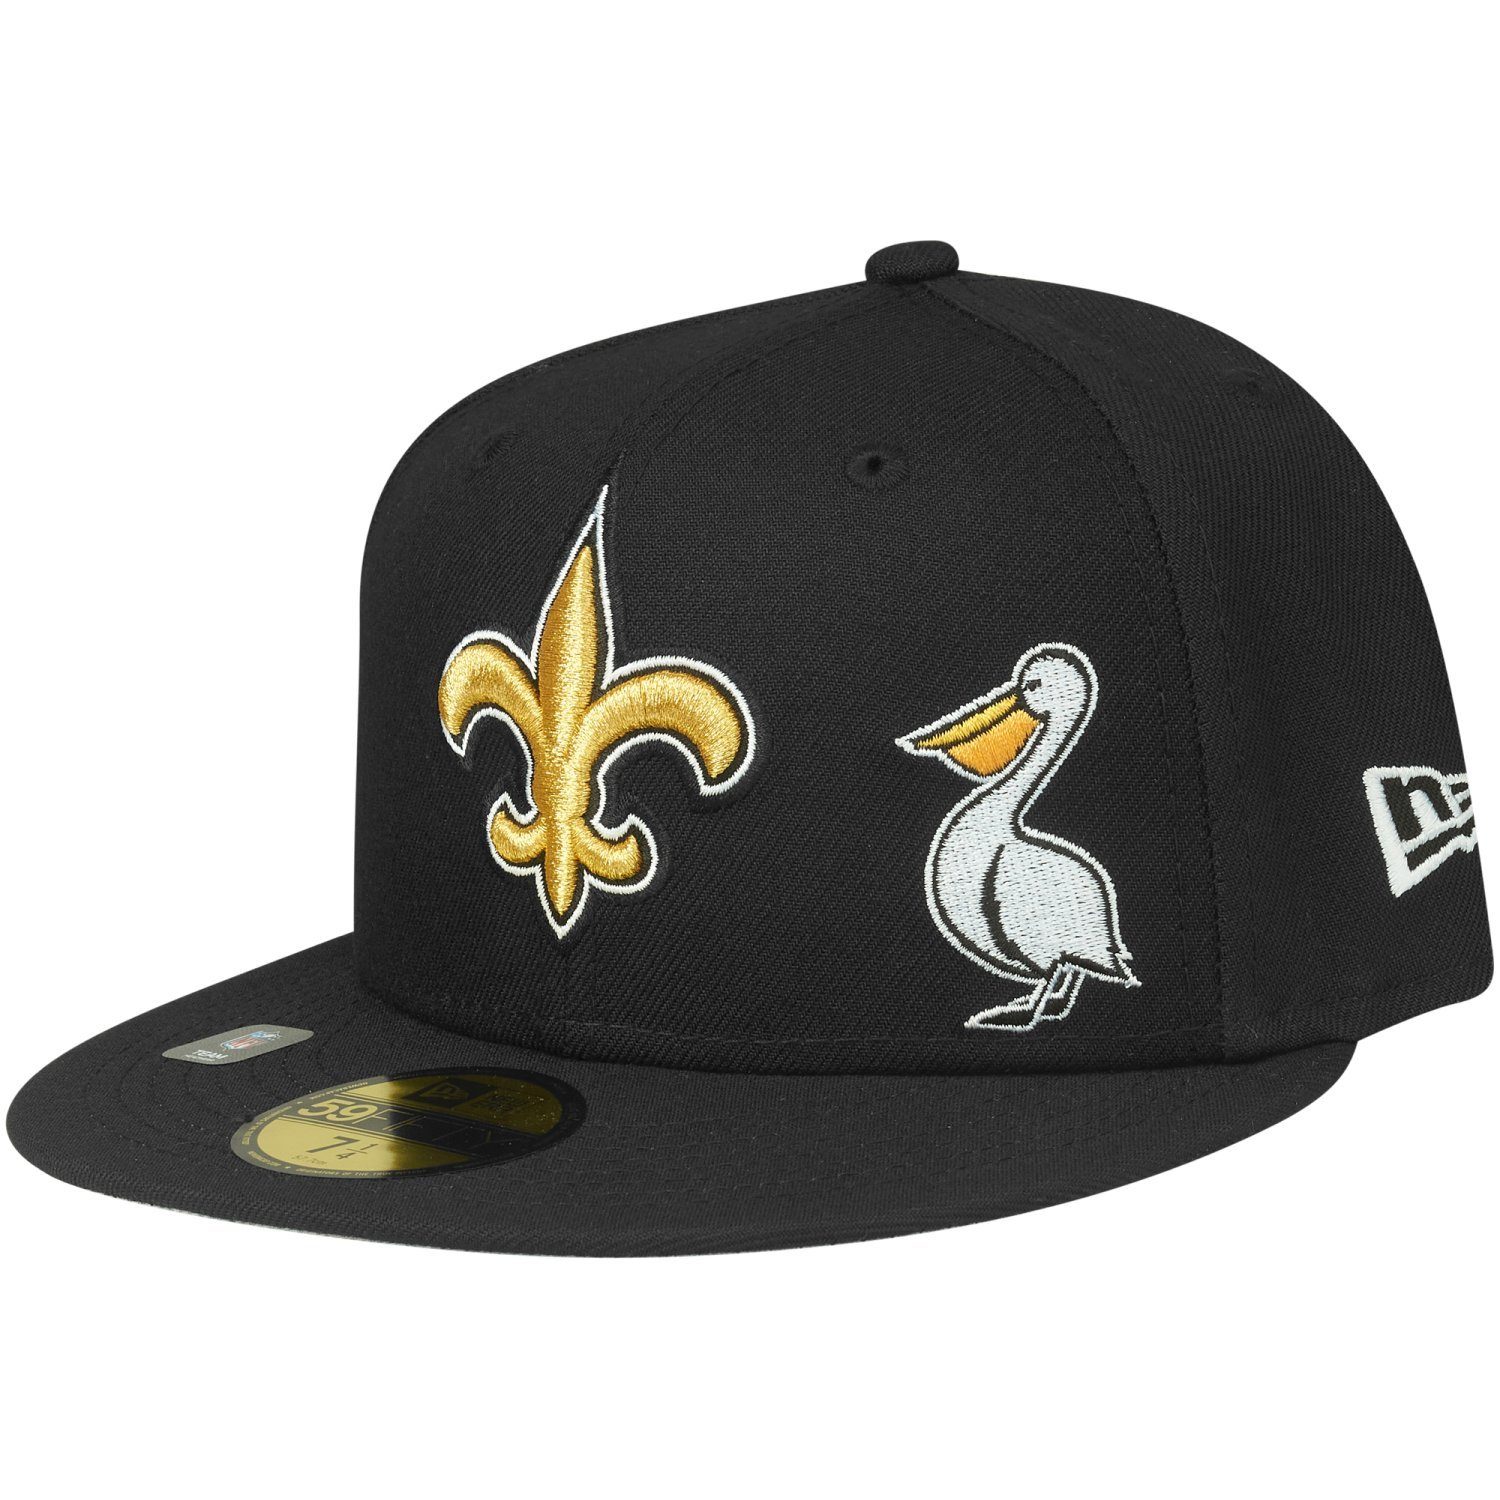 59Fifty NFL Cap Era Orleans New Saints Fitted New CITY